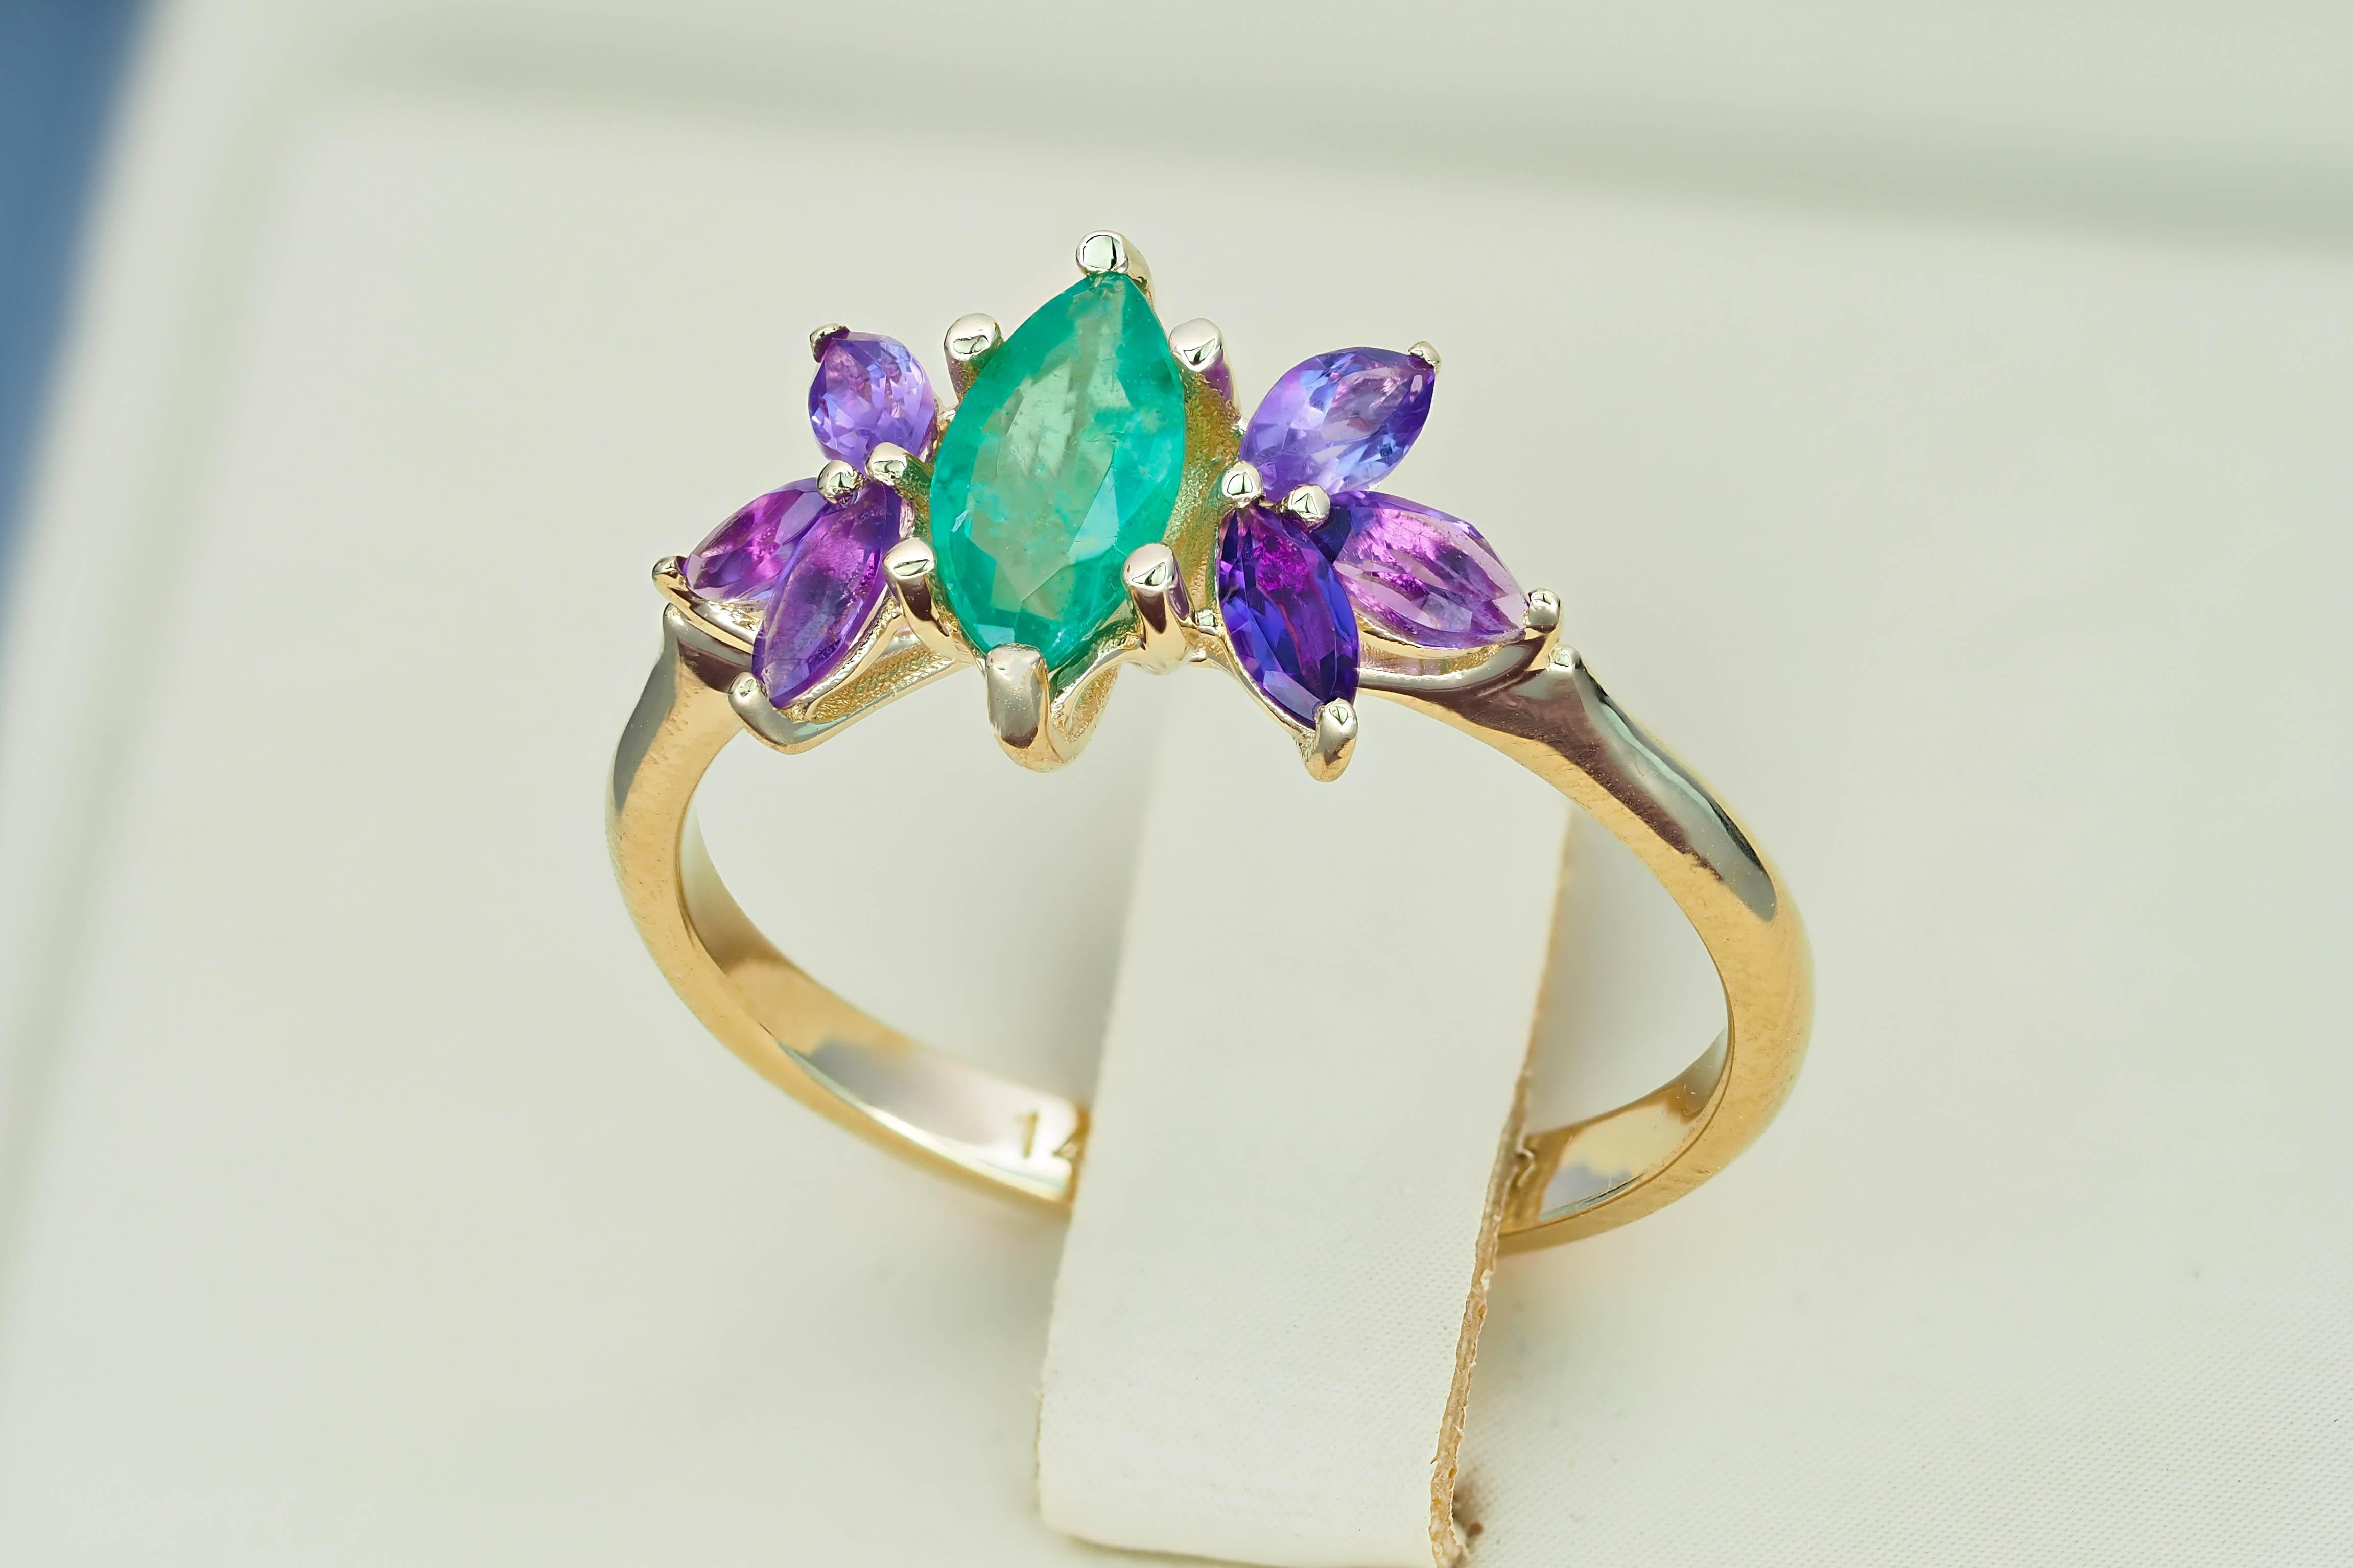 For Sale:  Emerald gold ring. 14k Gold Ring with Marquise Emerald and Amethysts.  9